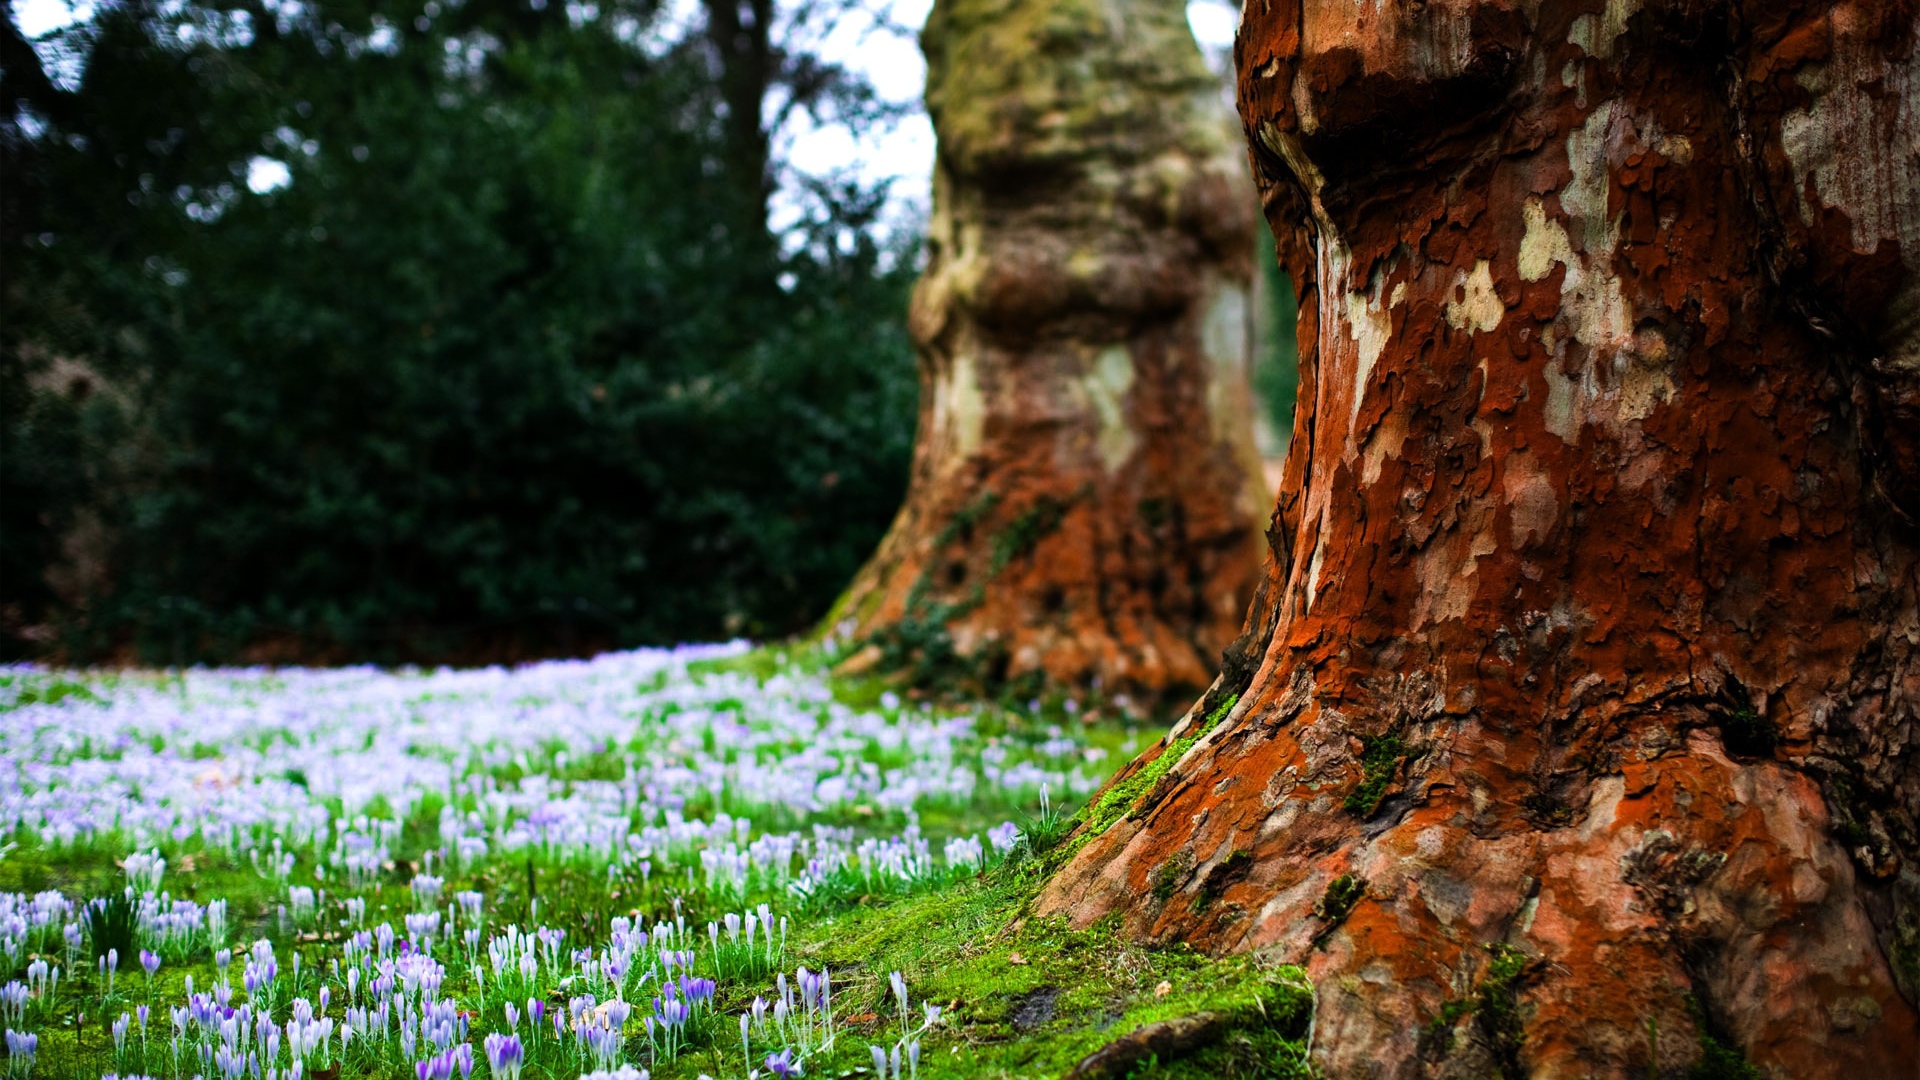 Download Wallpaper 1920x1080 Bark, Tree, Sprouts, Spring, Earth ...